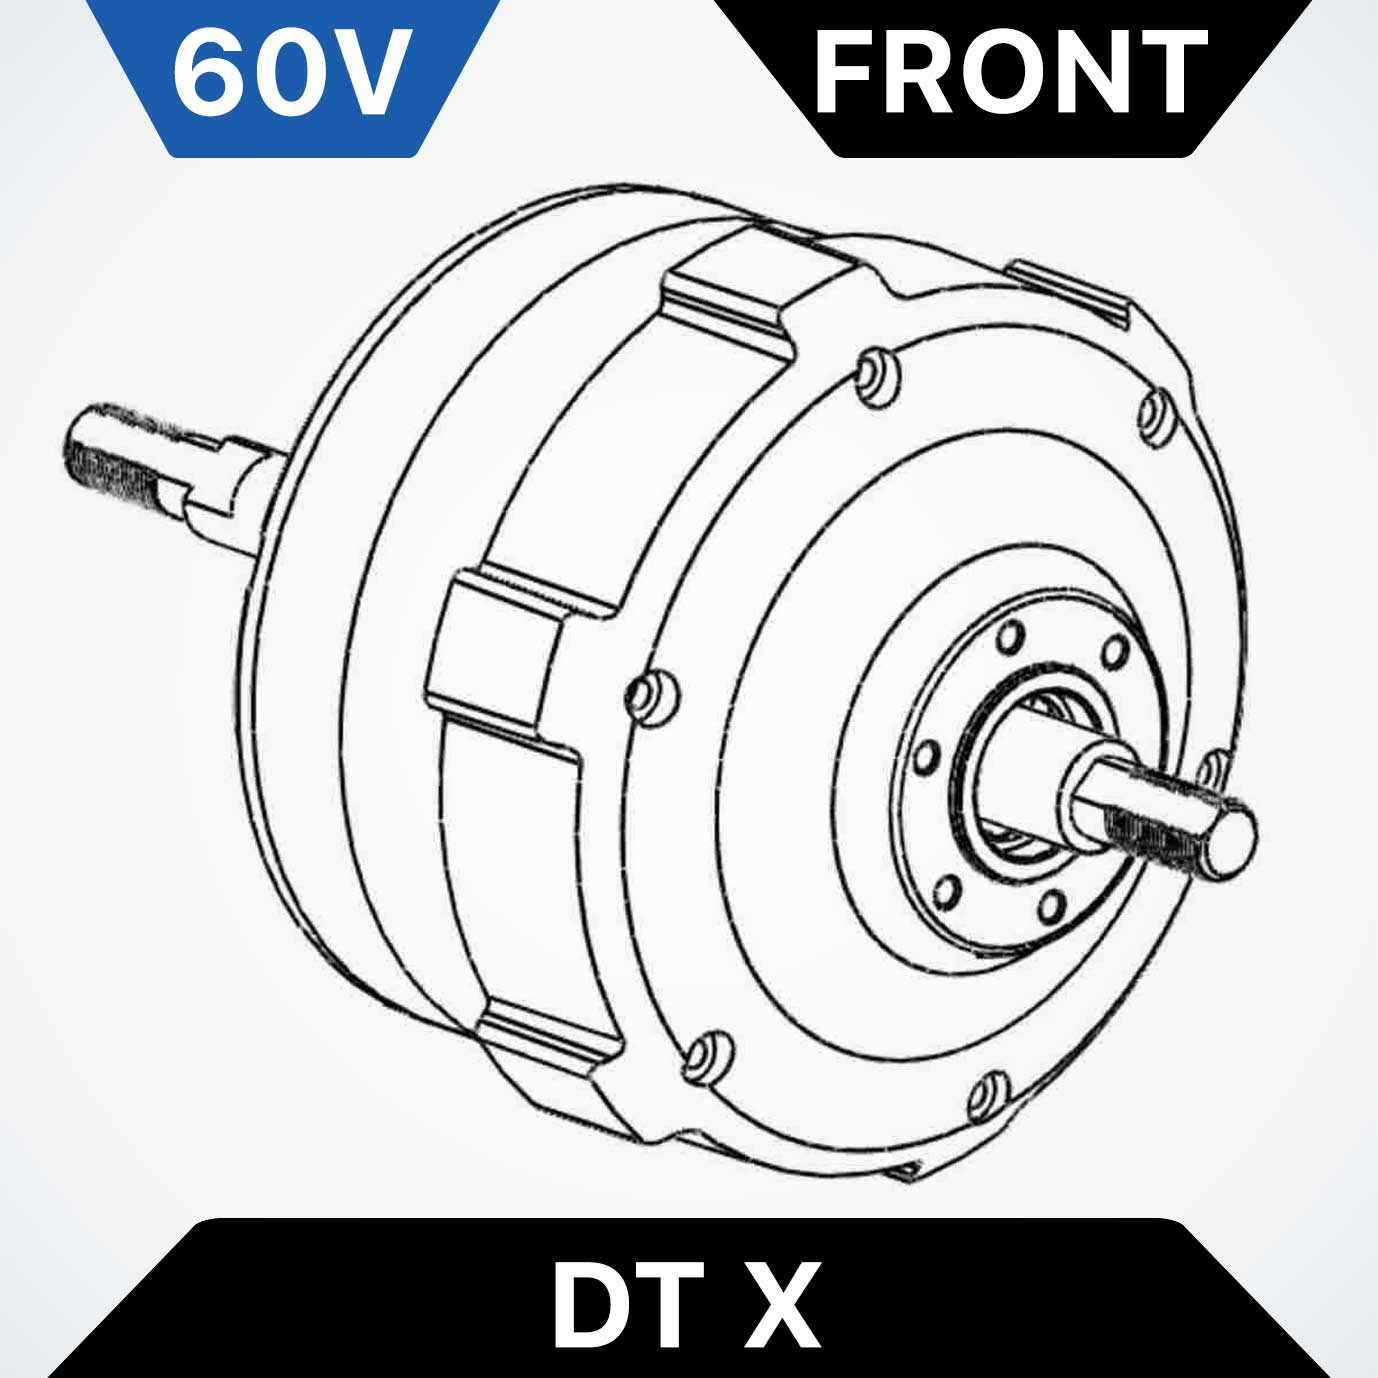 Front Motor for Dualtron X - 60V